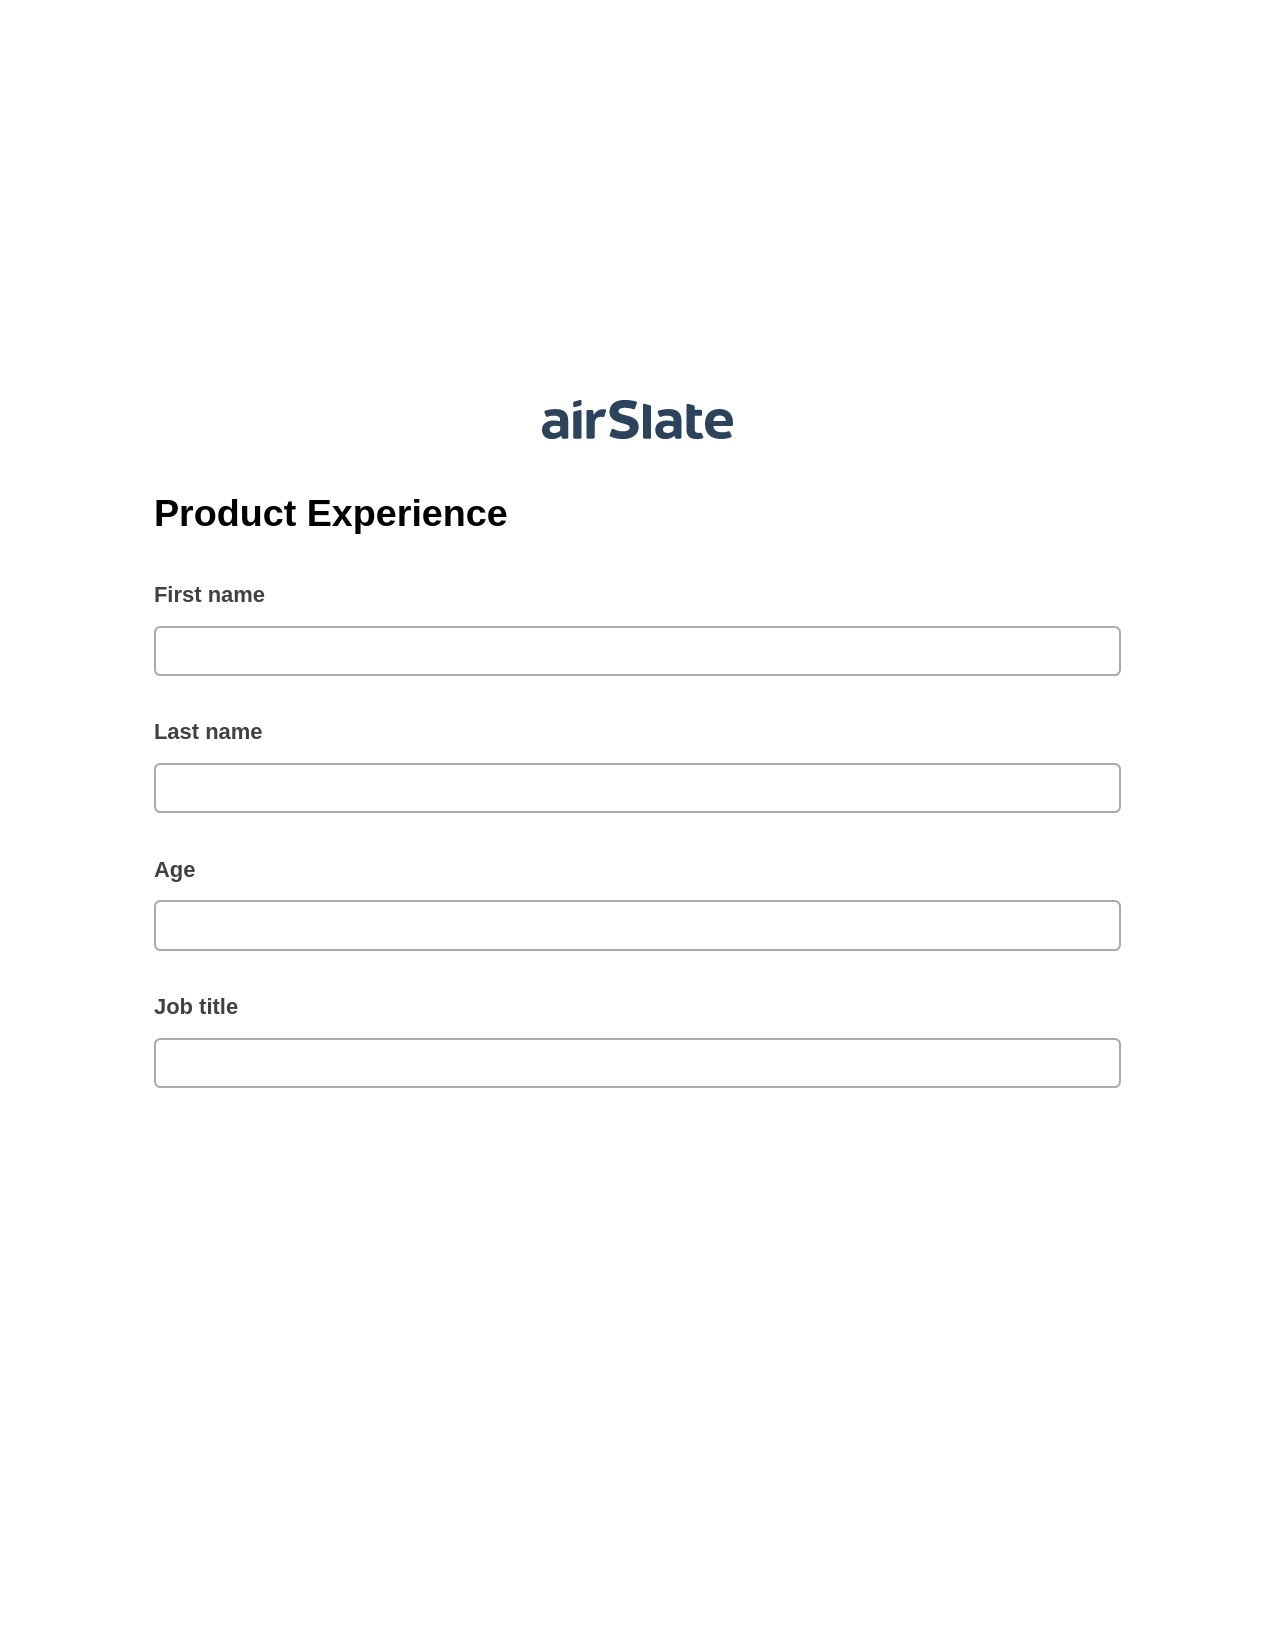 Product Experience Pre-fill from CSV File Bot, Webhook Bot, Export to Google Sheet Bot